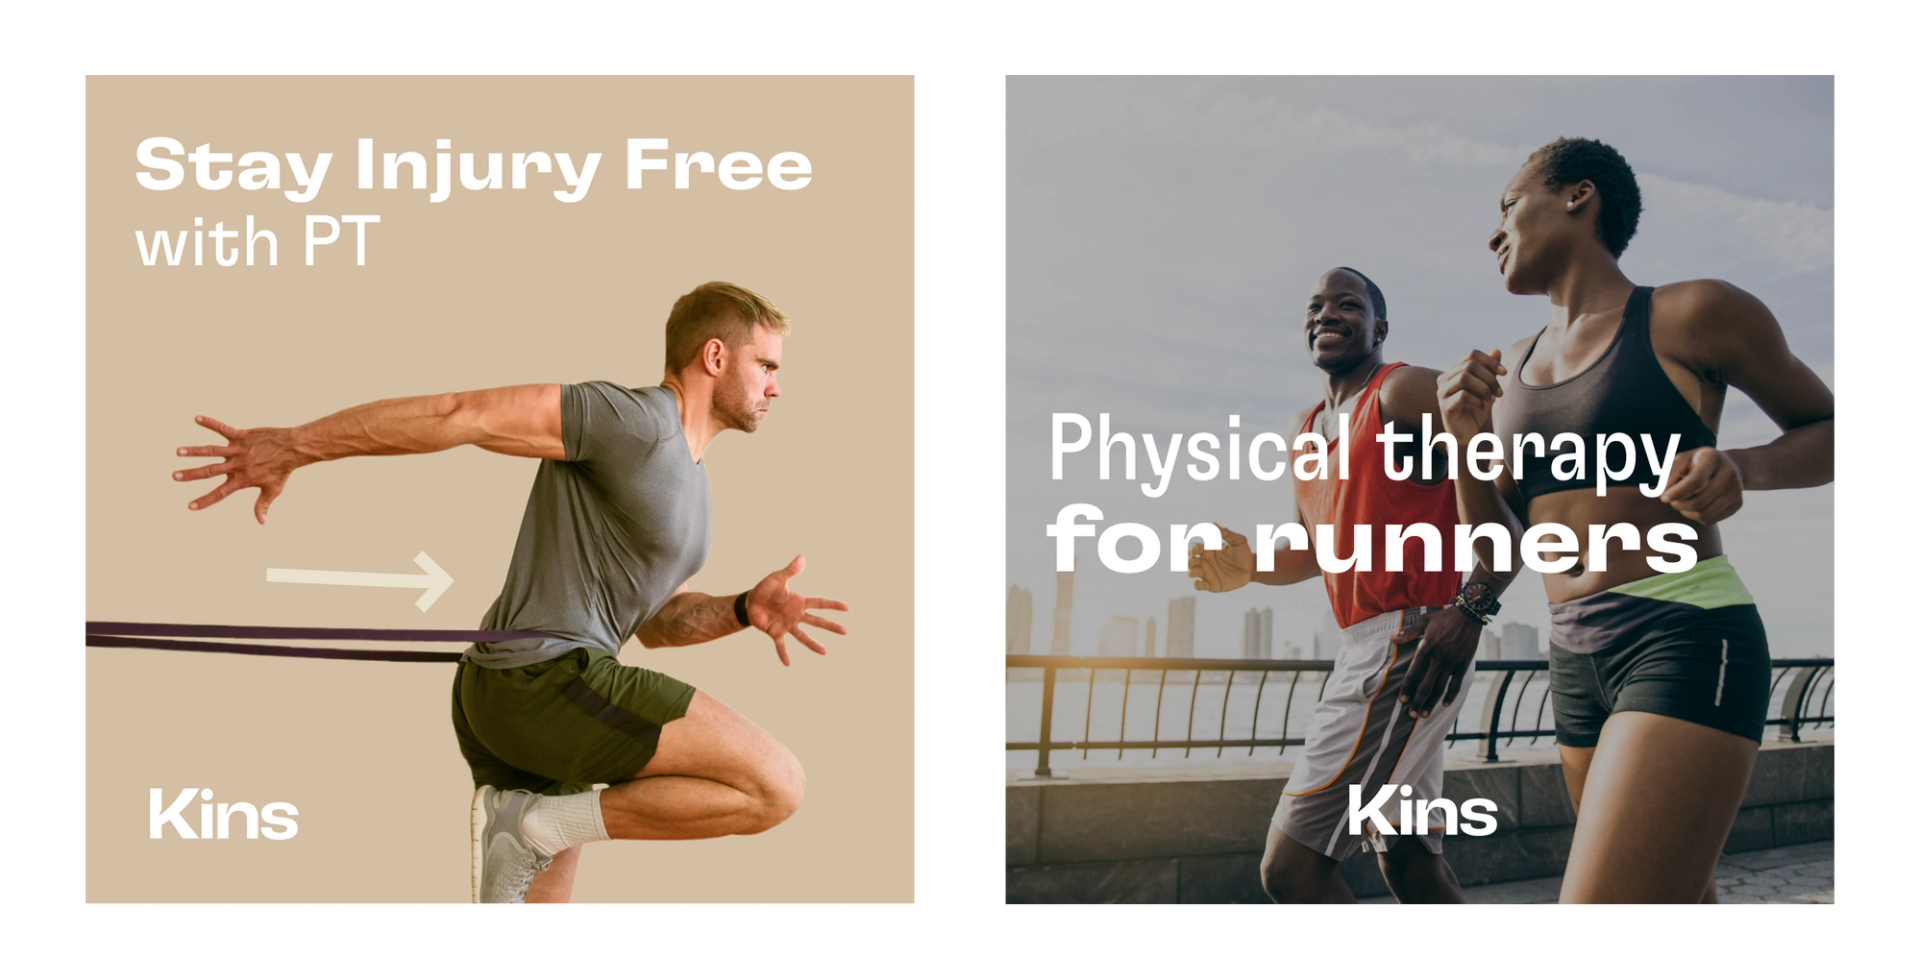 A pair of ads for Kins physiotherapy that have been customized to feature runners.